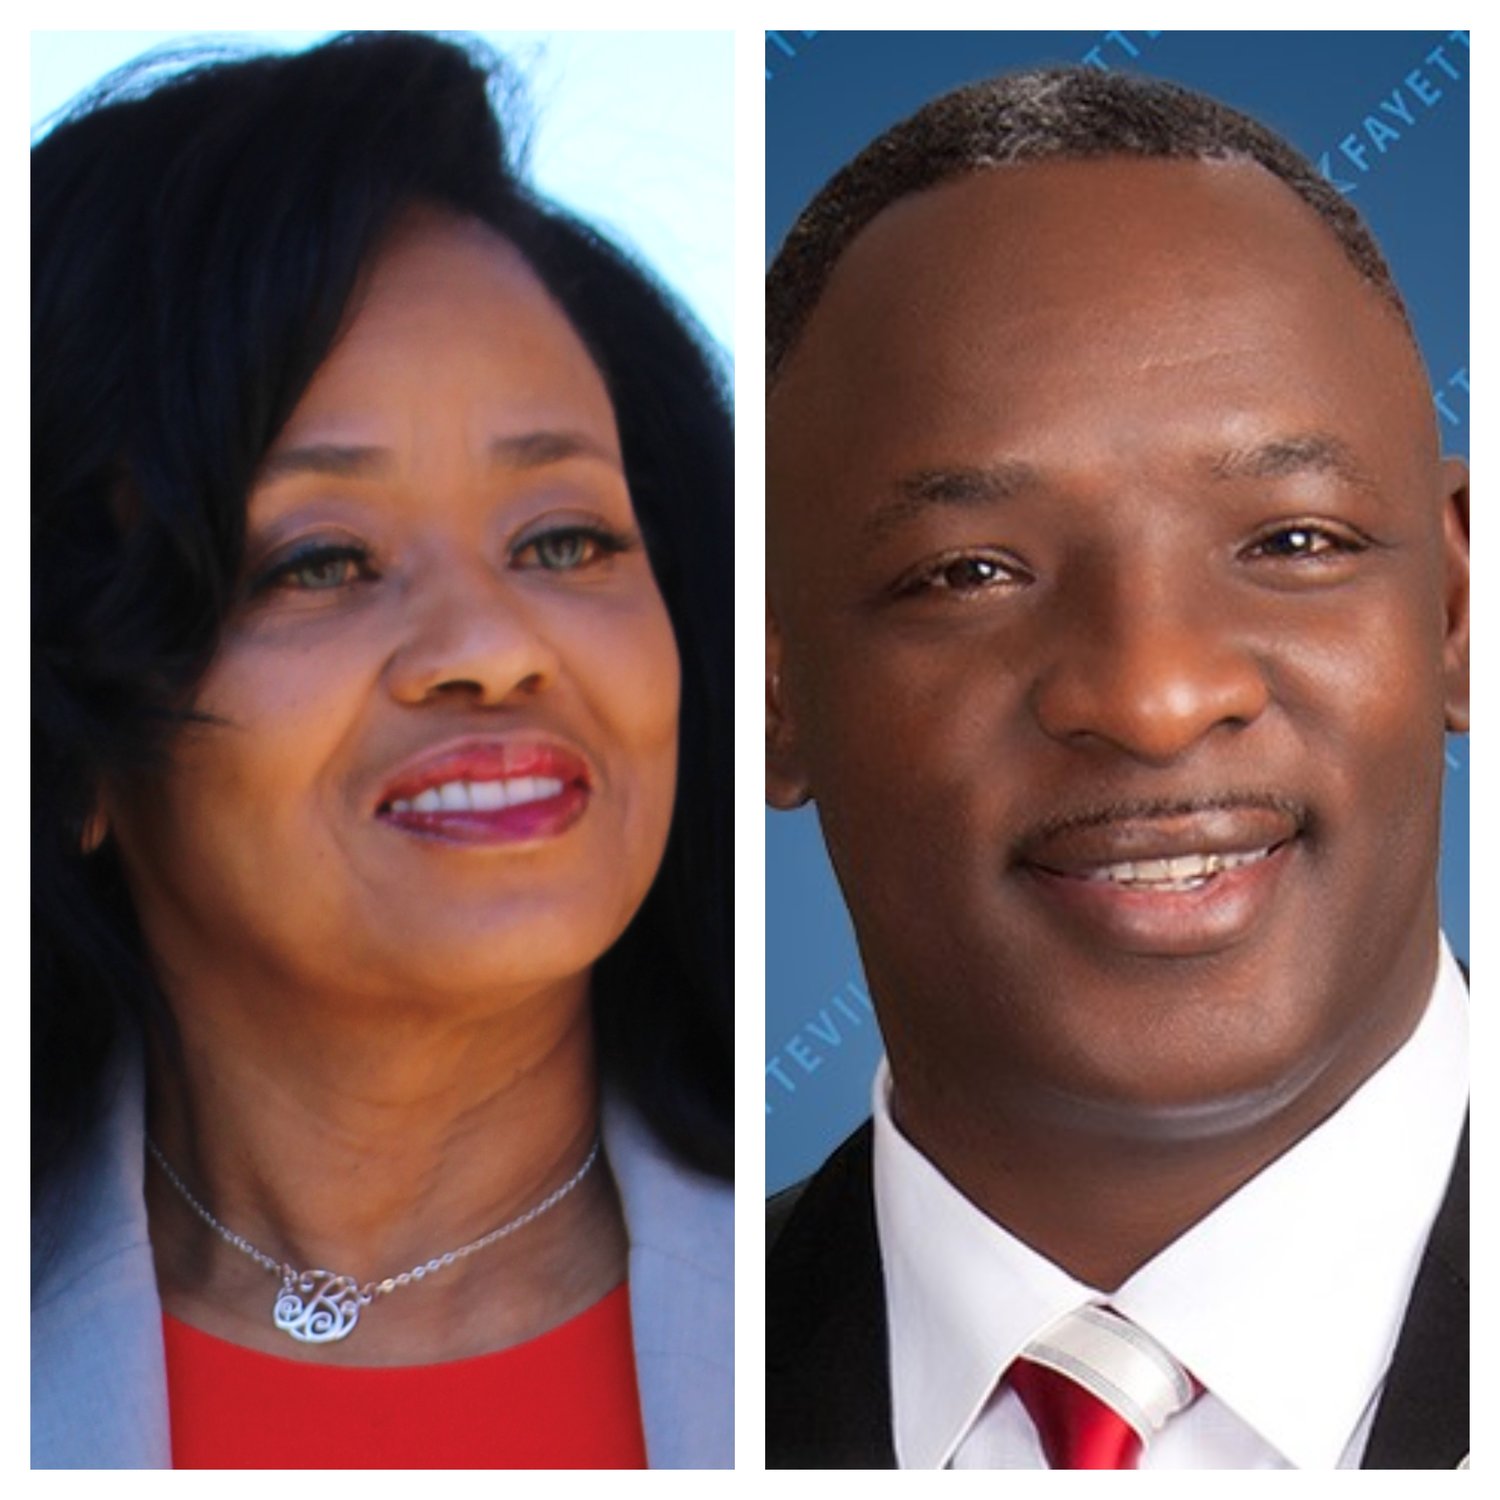 Political newcomer Brenda McNair defeated incumbent Larry Wright for the District 7 seat on the Fayetteville City Council, according to unofficial returns.